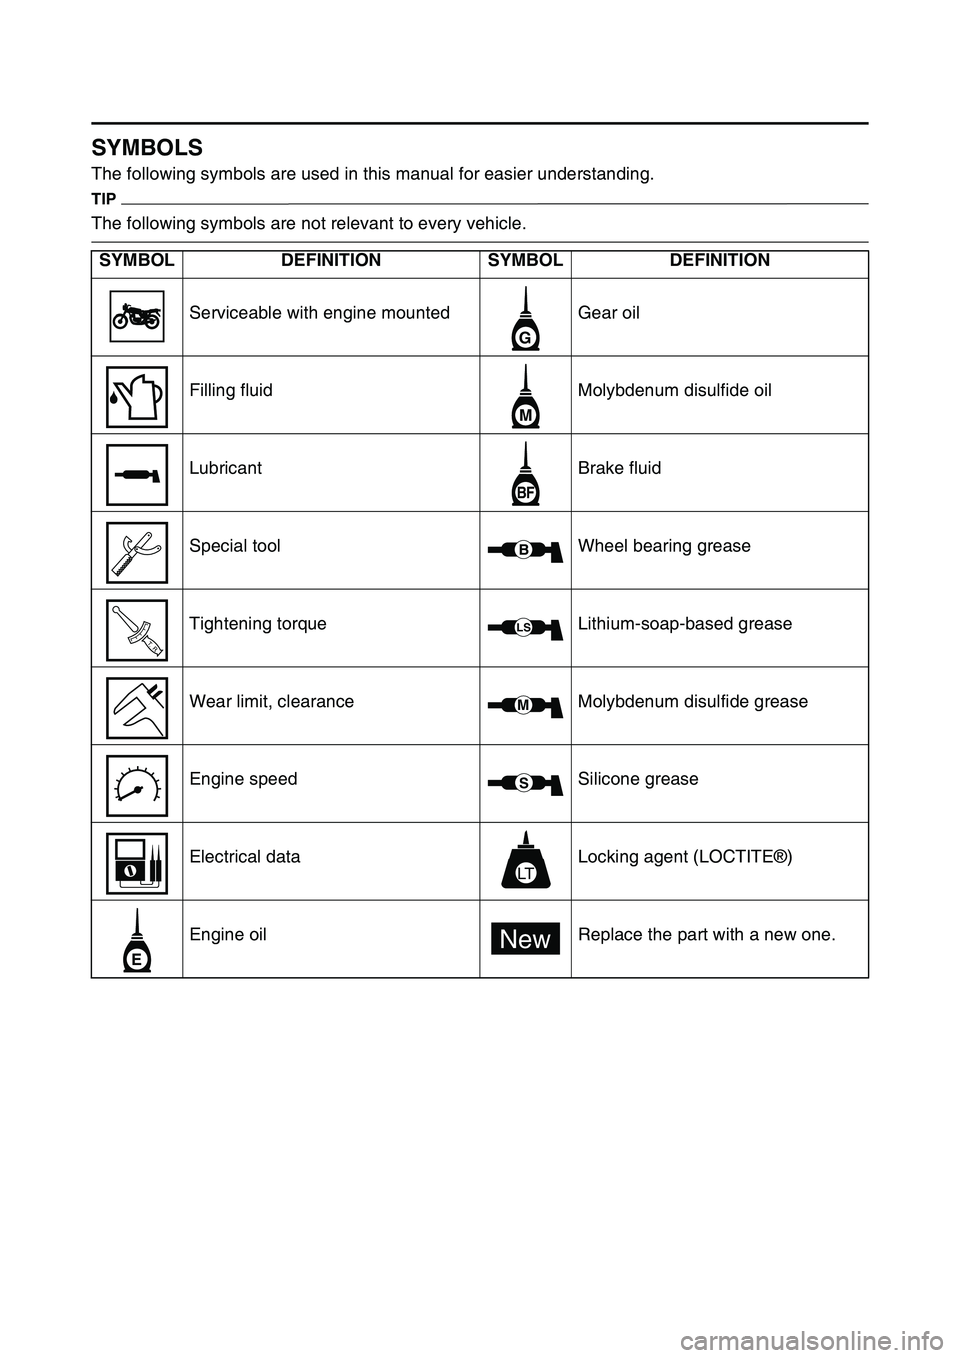 YAMAHA YZ450F 2014  Owners Manual EAS1SL1007
SYMBOLS
The following symbols are used in this manual for easier understanding.
TIP
The following symbols are not relevant to every vehicle.
SYMBOLDEFINITIONSYMBOLDEFINITION
Serviceable wit